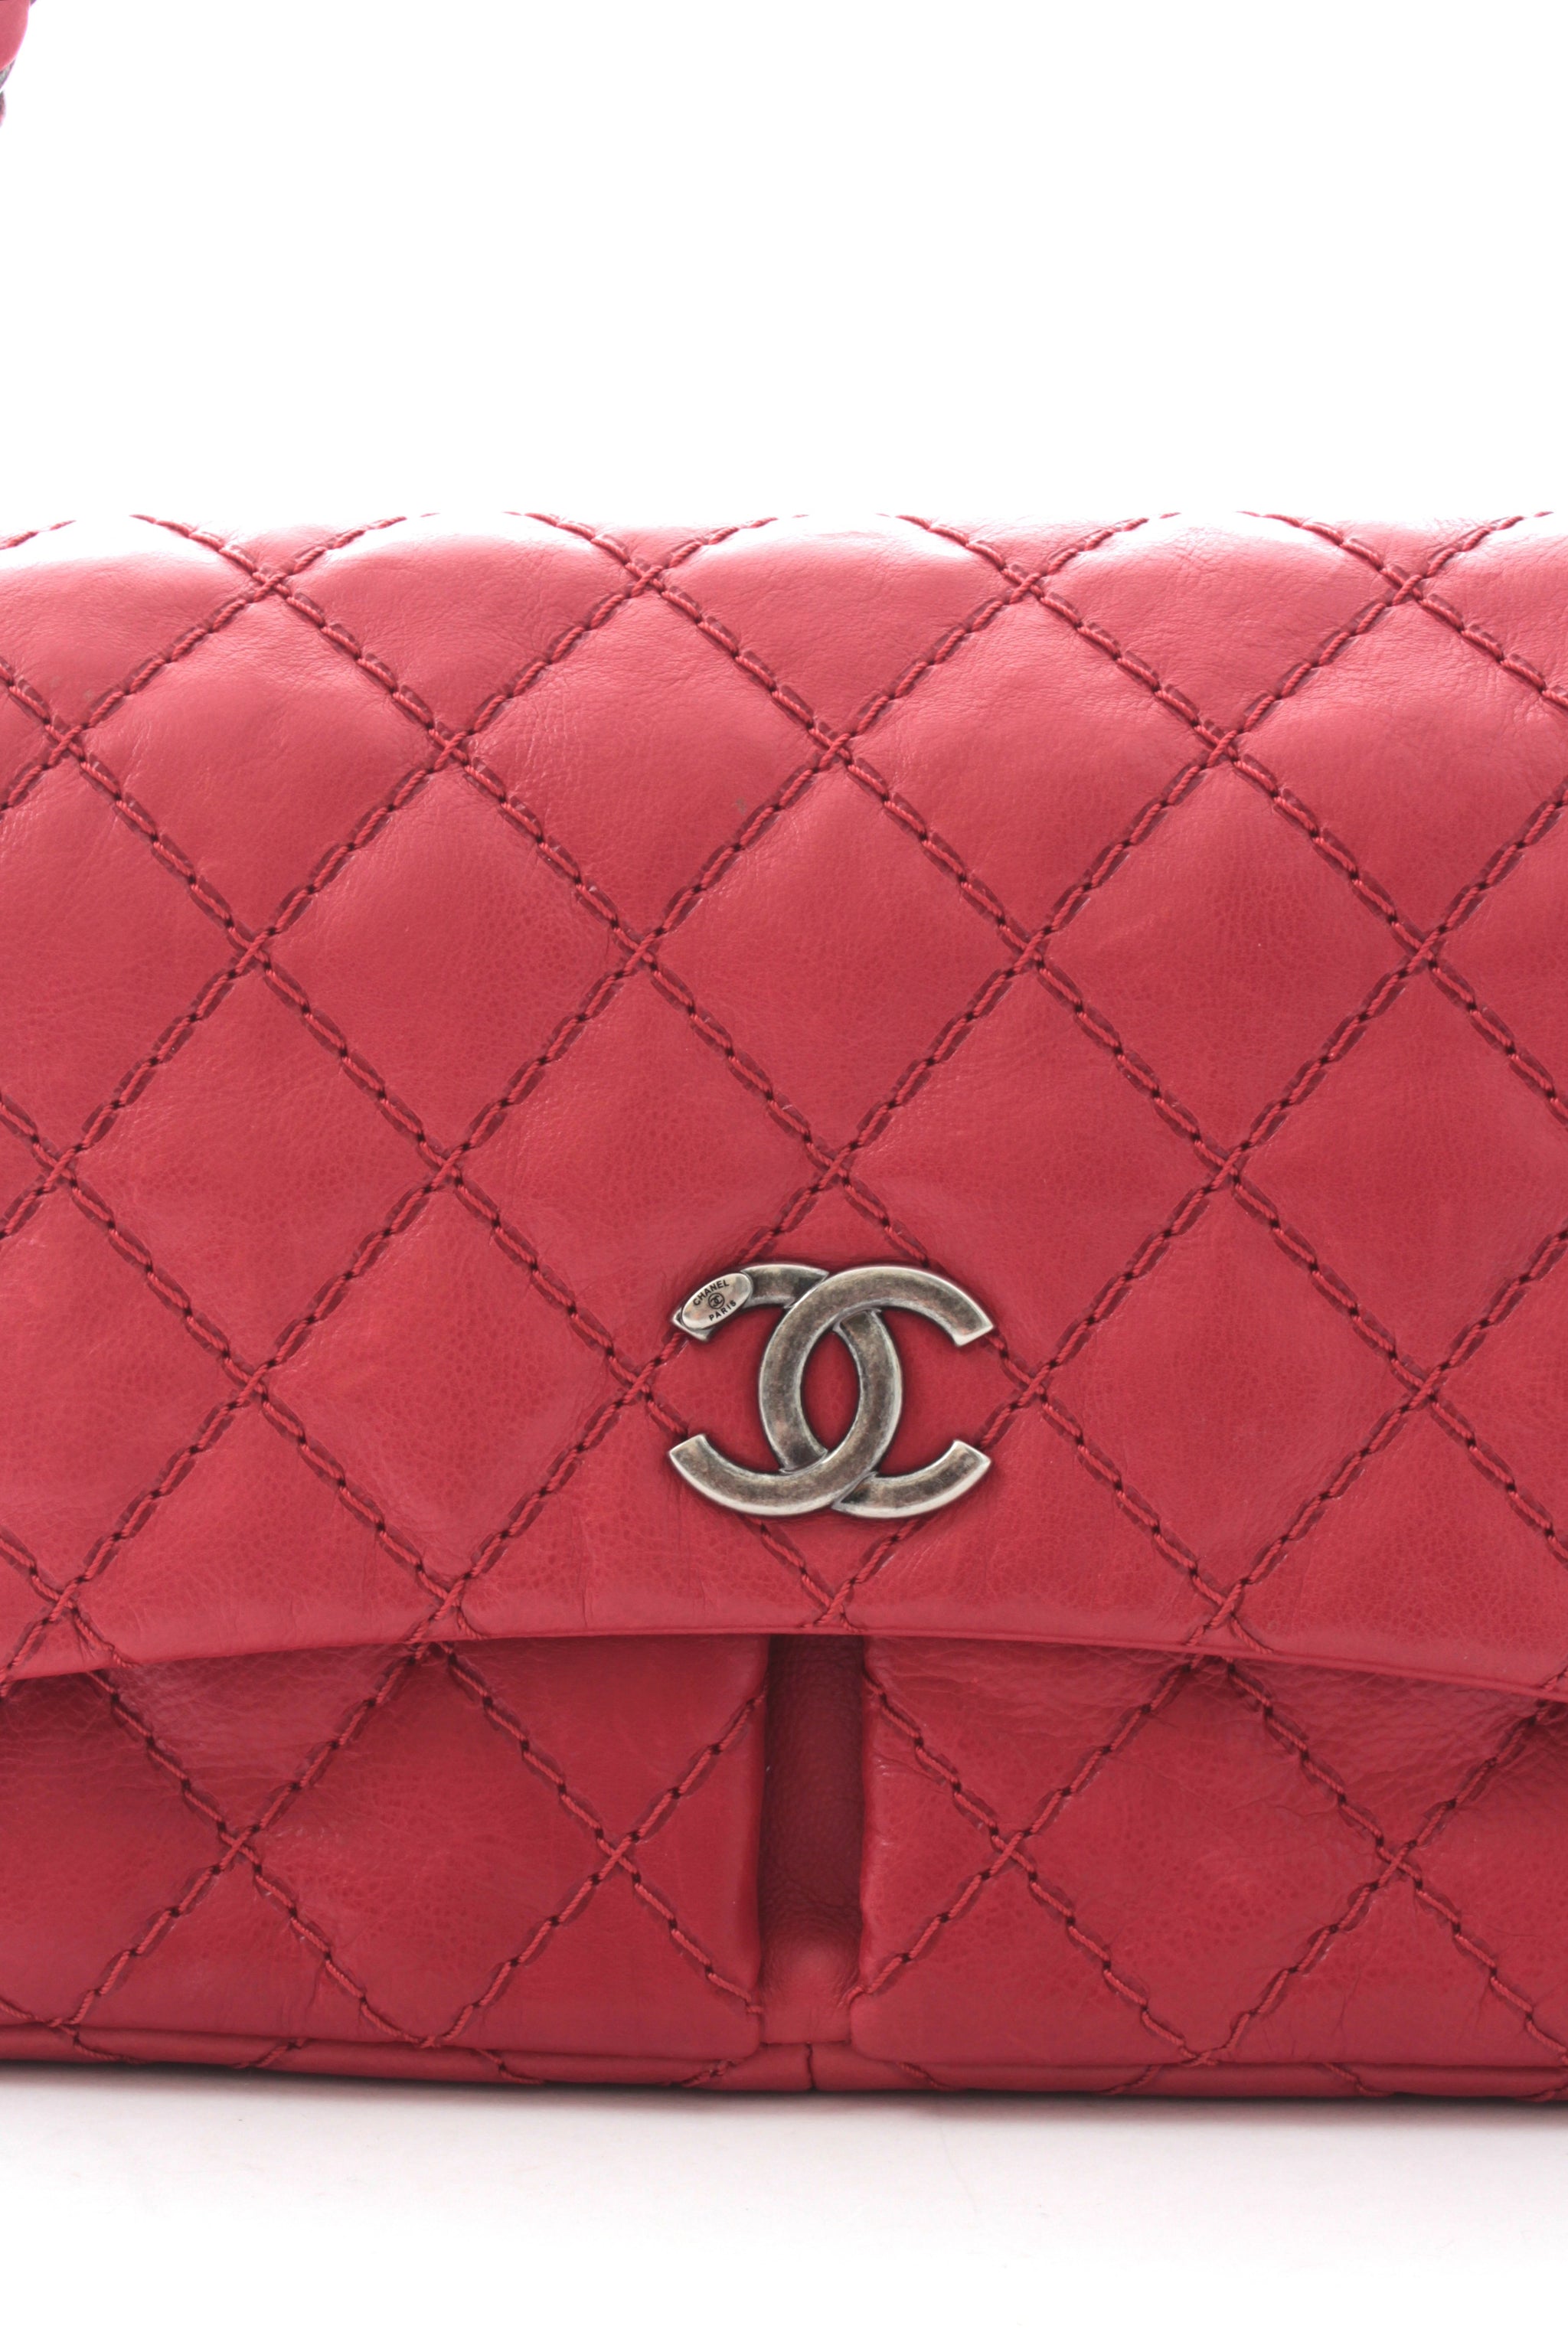 Chanel Limited Edition Large Leather Flap Bag (A67725) - Closet